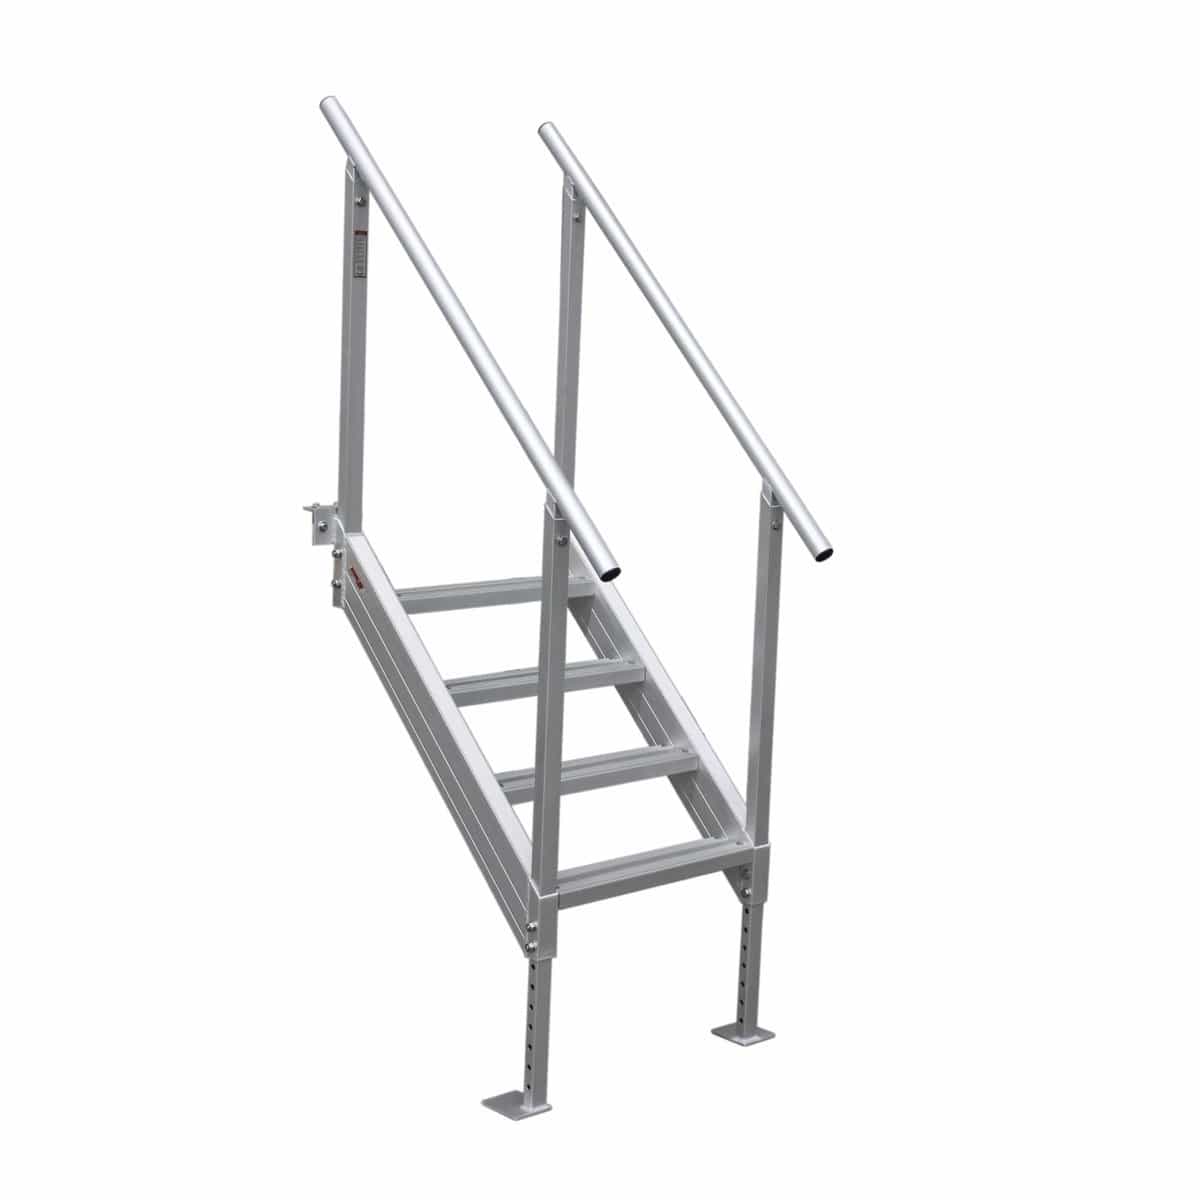 Extreme Max Not Qualified for Free Shipping Extreme Max Universal Mount Aluminum Dock Stair 4-Step #3005.3843